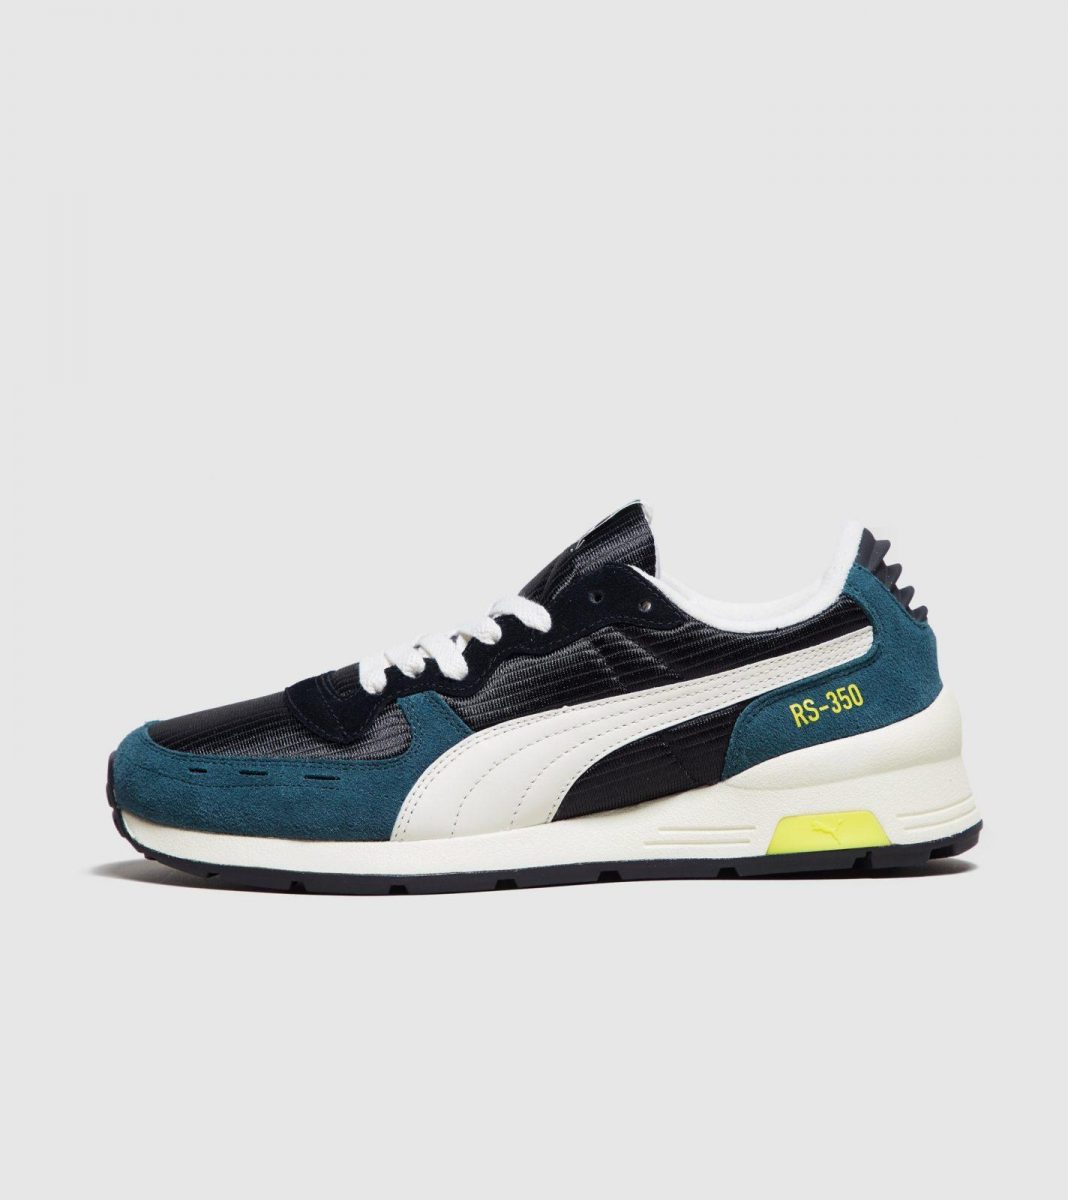 PUMA RS-350 OG (36557405) - SNEAKER SEARCH